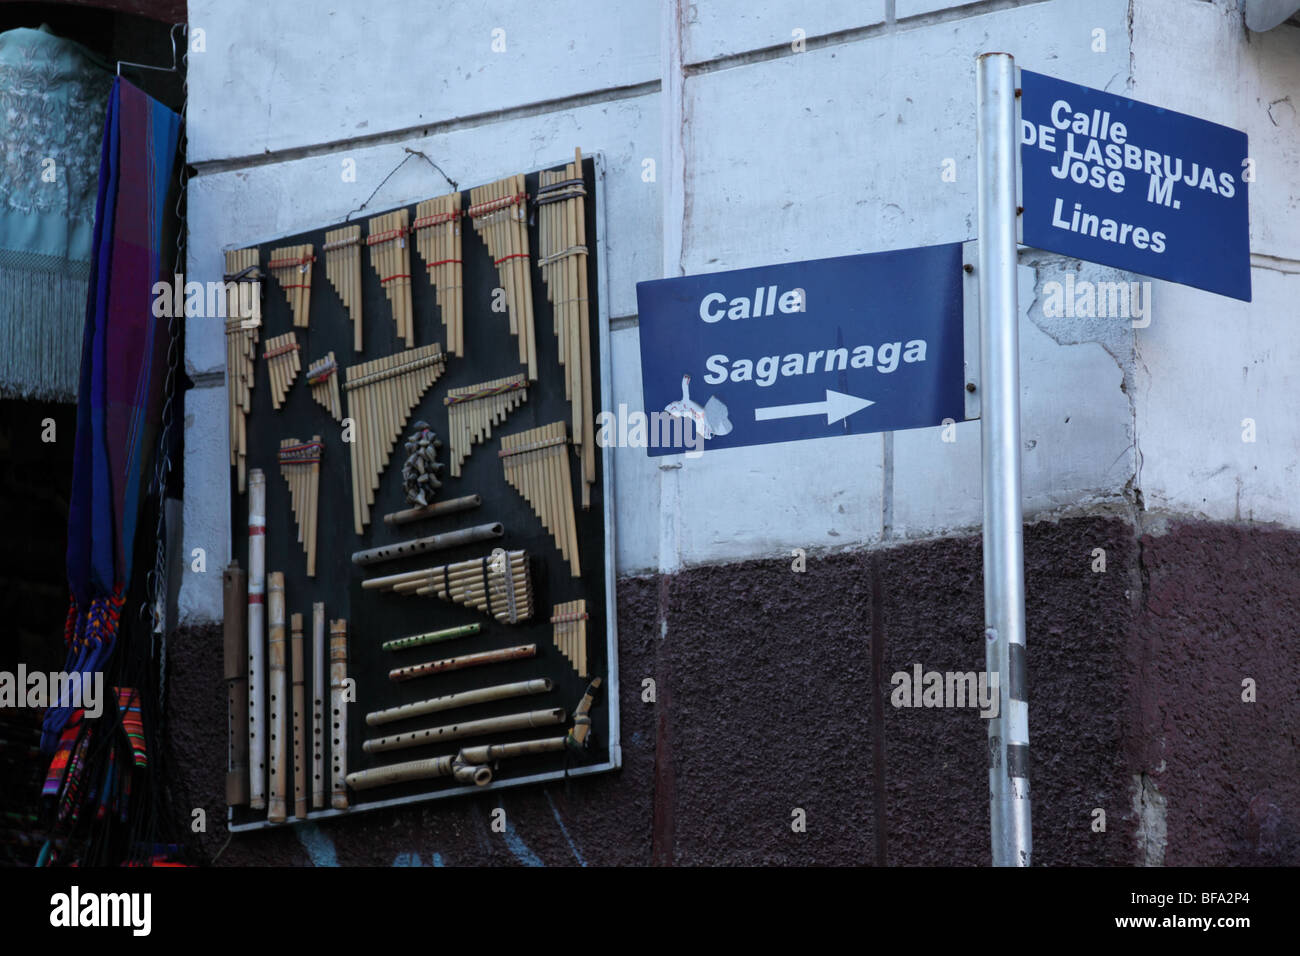 Sign for Witches Market on corner of Calles Sagarnaga and Linares, musical instruments hanging on wall behind, La Paz, Bolivia. Stock Photo